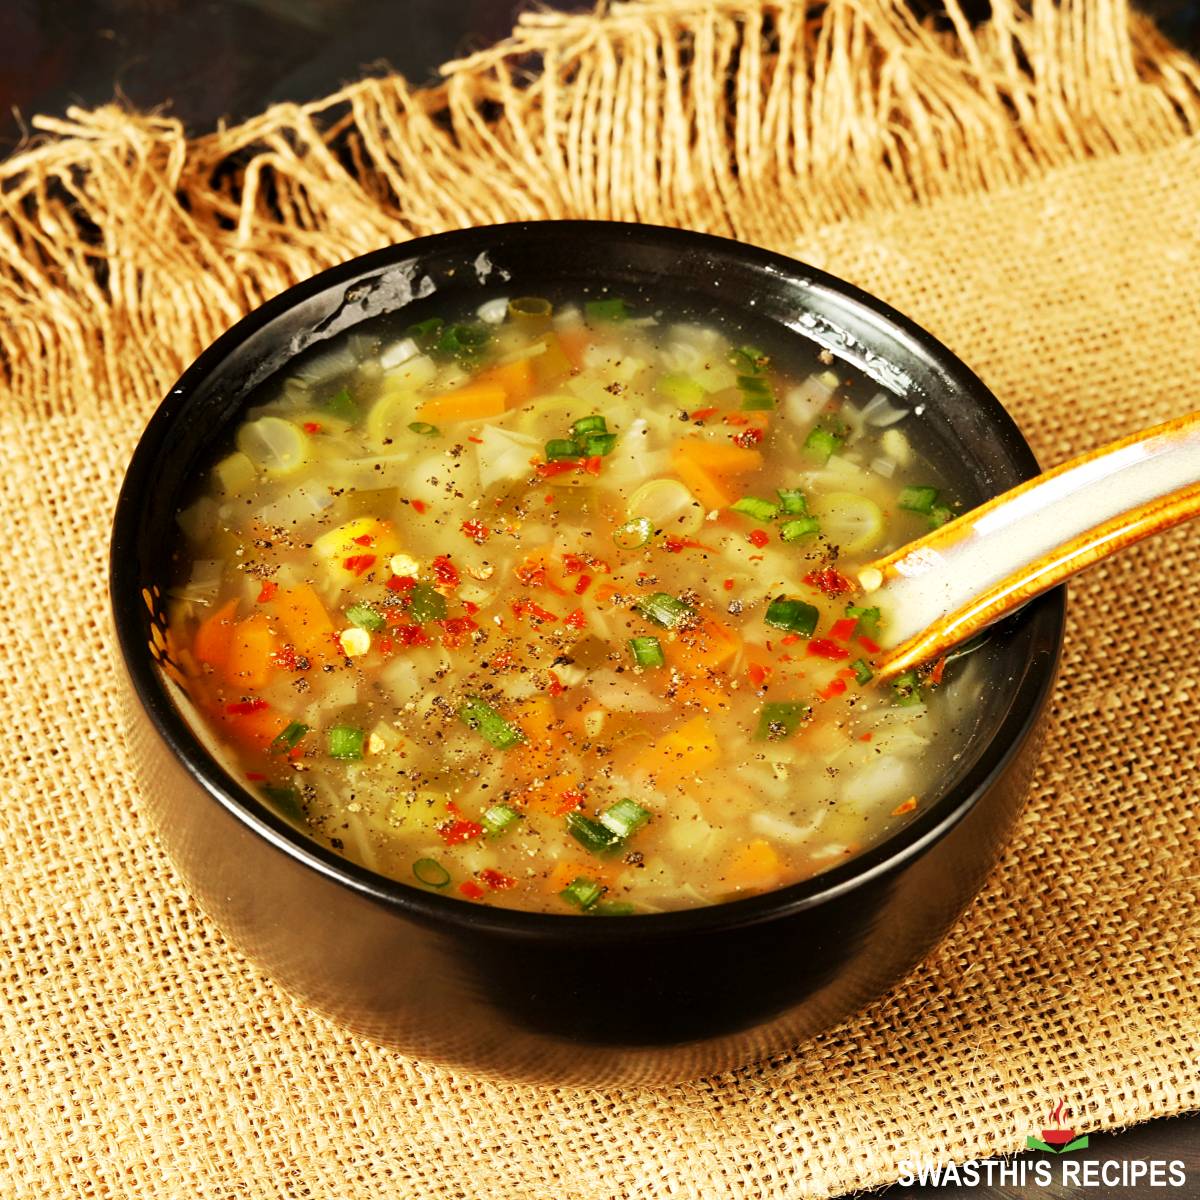 Vegetable Soup Recipe - Swasthi's Recipes